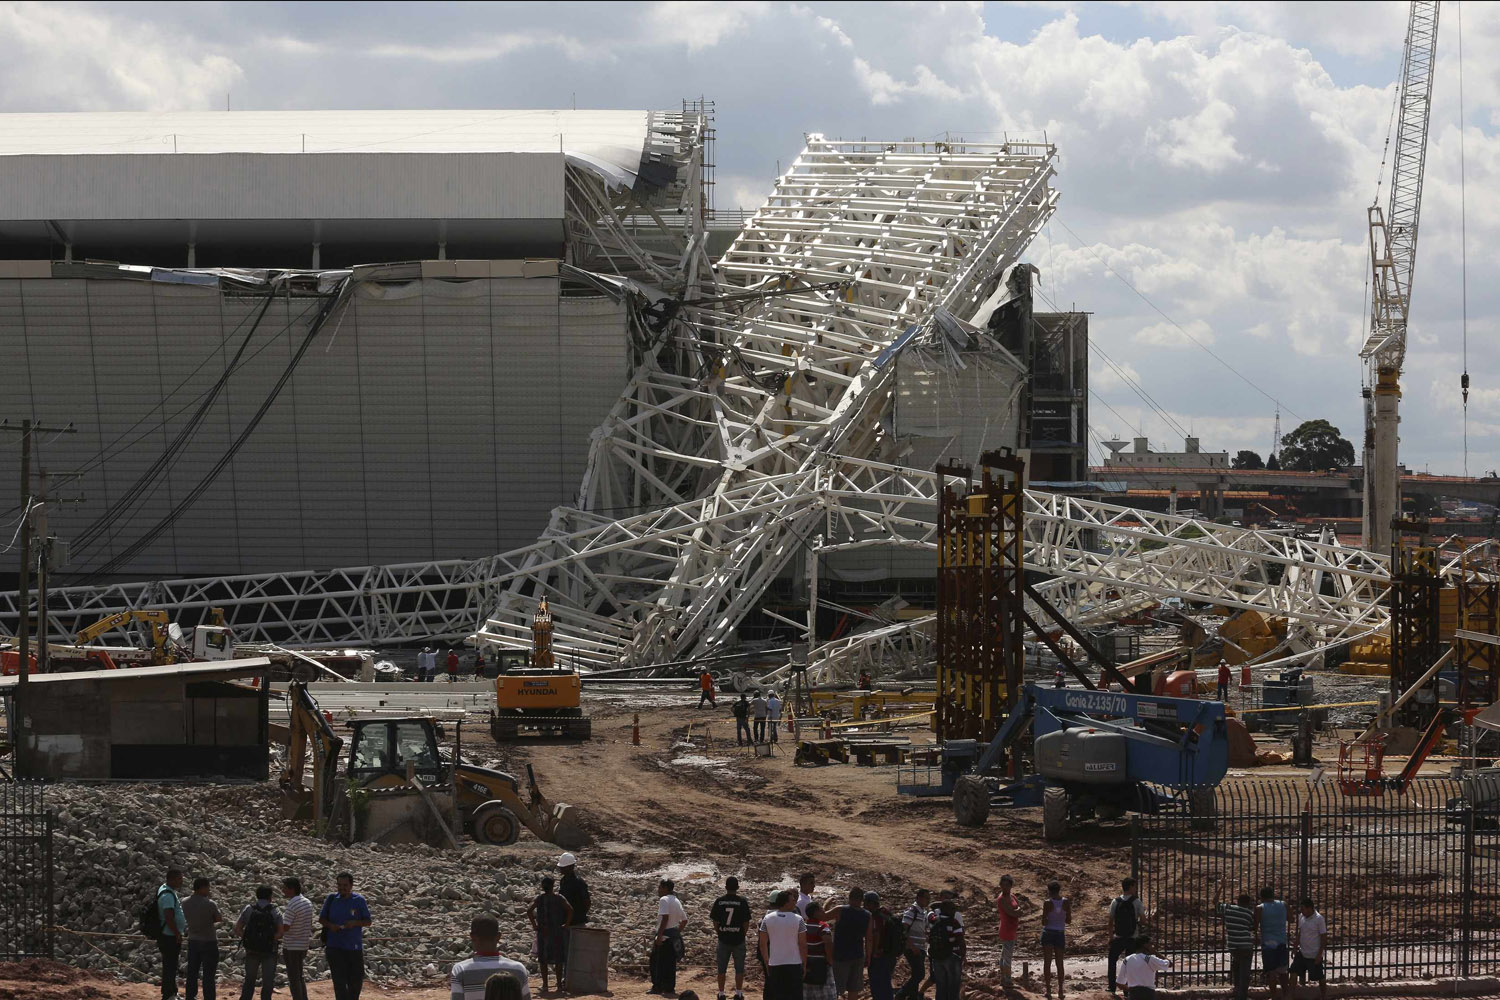 Workers stand near a crane that collapsed on the site of the Arena Sao Paulo stadium, known as "Itaquerao", which will host the opening soccer match of the 2014 World Cup, in Sao Paulo